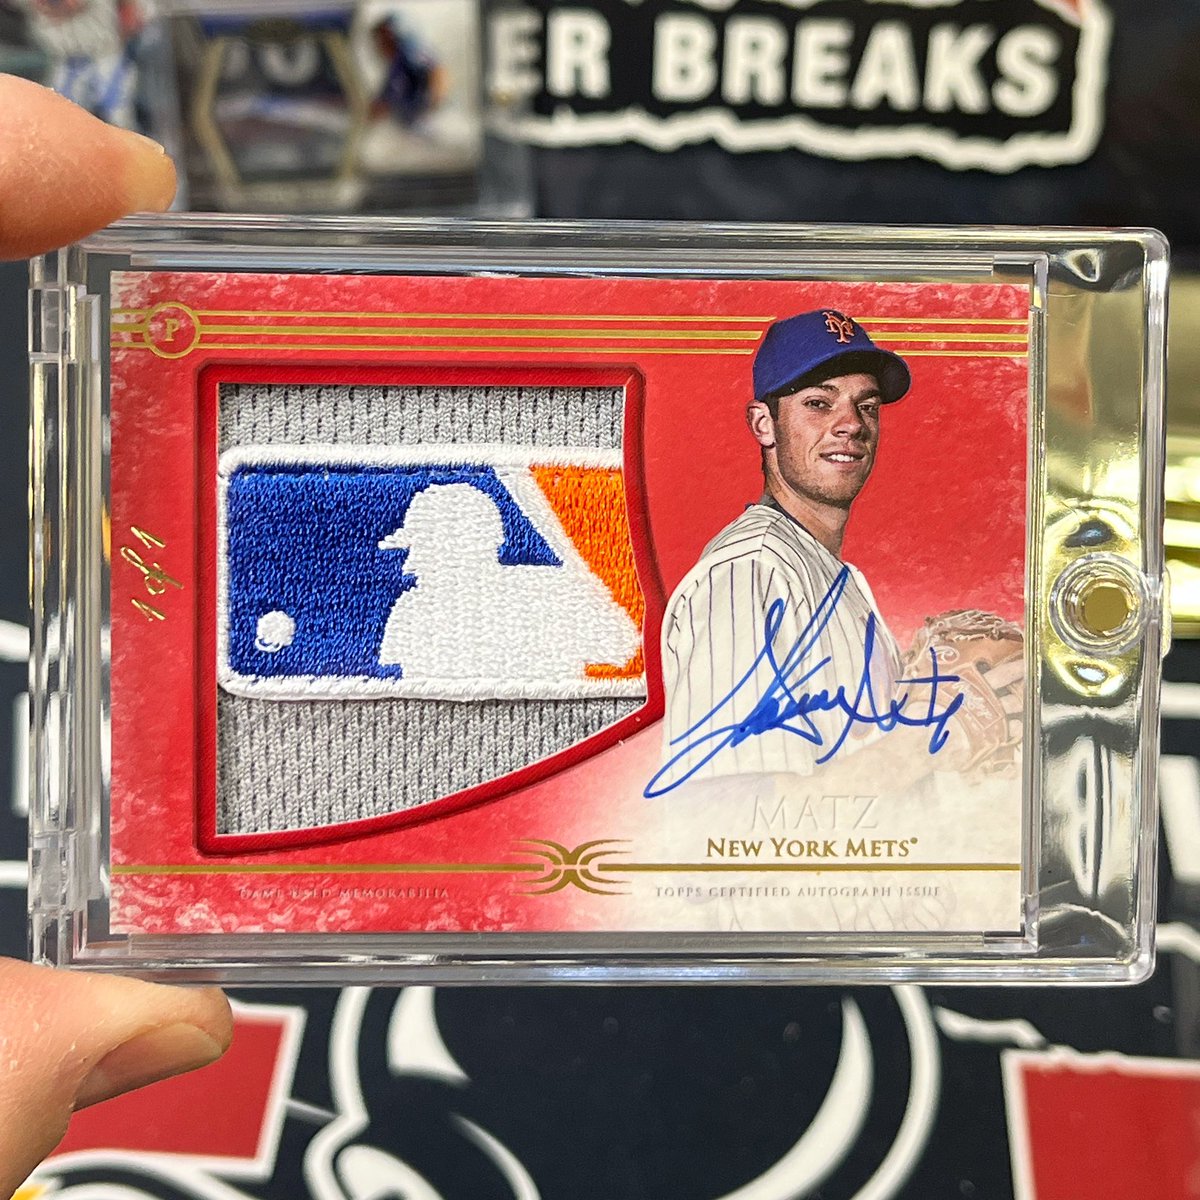 Steven Matz 1/1 Definitive MLB Logoman Auto with a cool Boom out of our @collectgoldrush Premier Players Baseball breaks!
💣💥🔥 @topps @Smatz88 
#boom #thehobby #groupbreaks #newyorkmets #mets #newyork #mlb #baseball #autograph #1of1 #stevenmatz #definitive #logoman